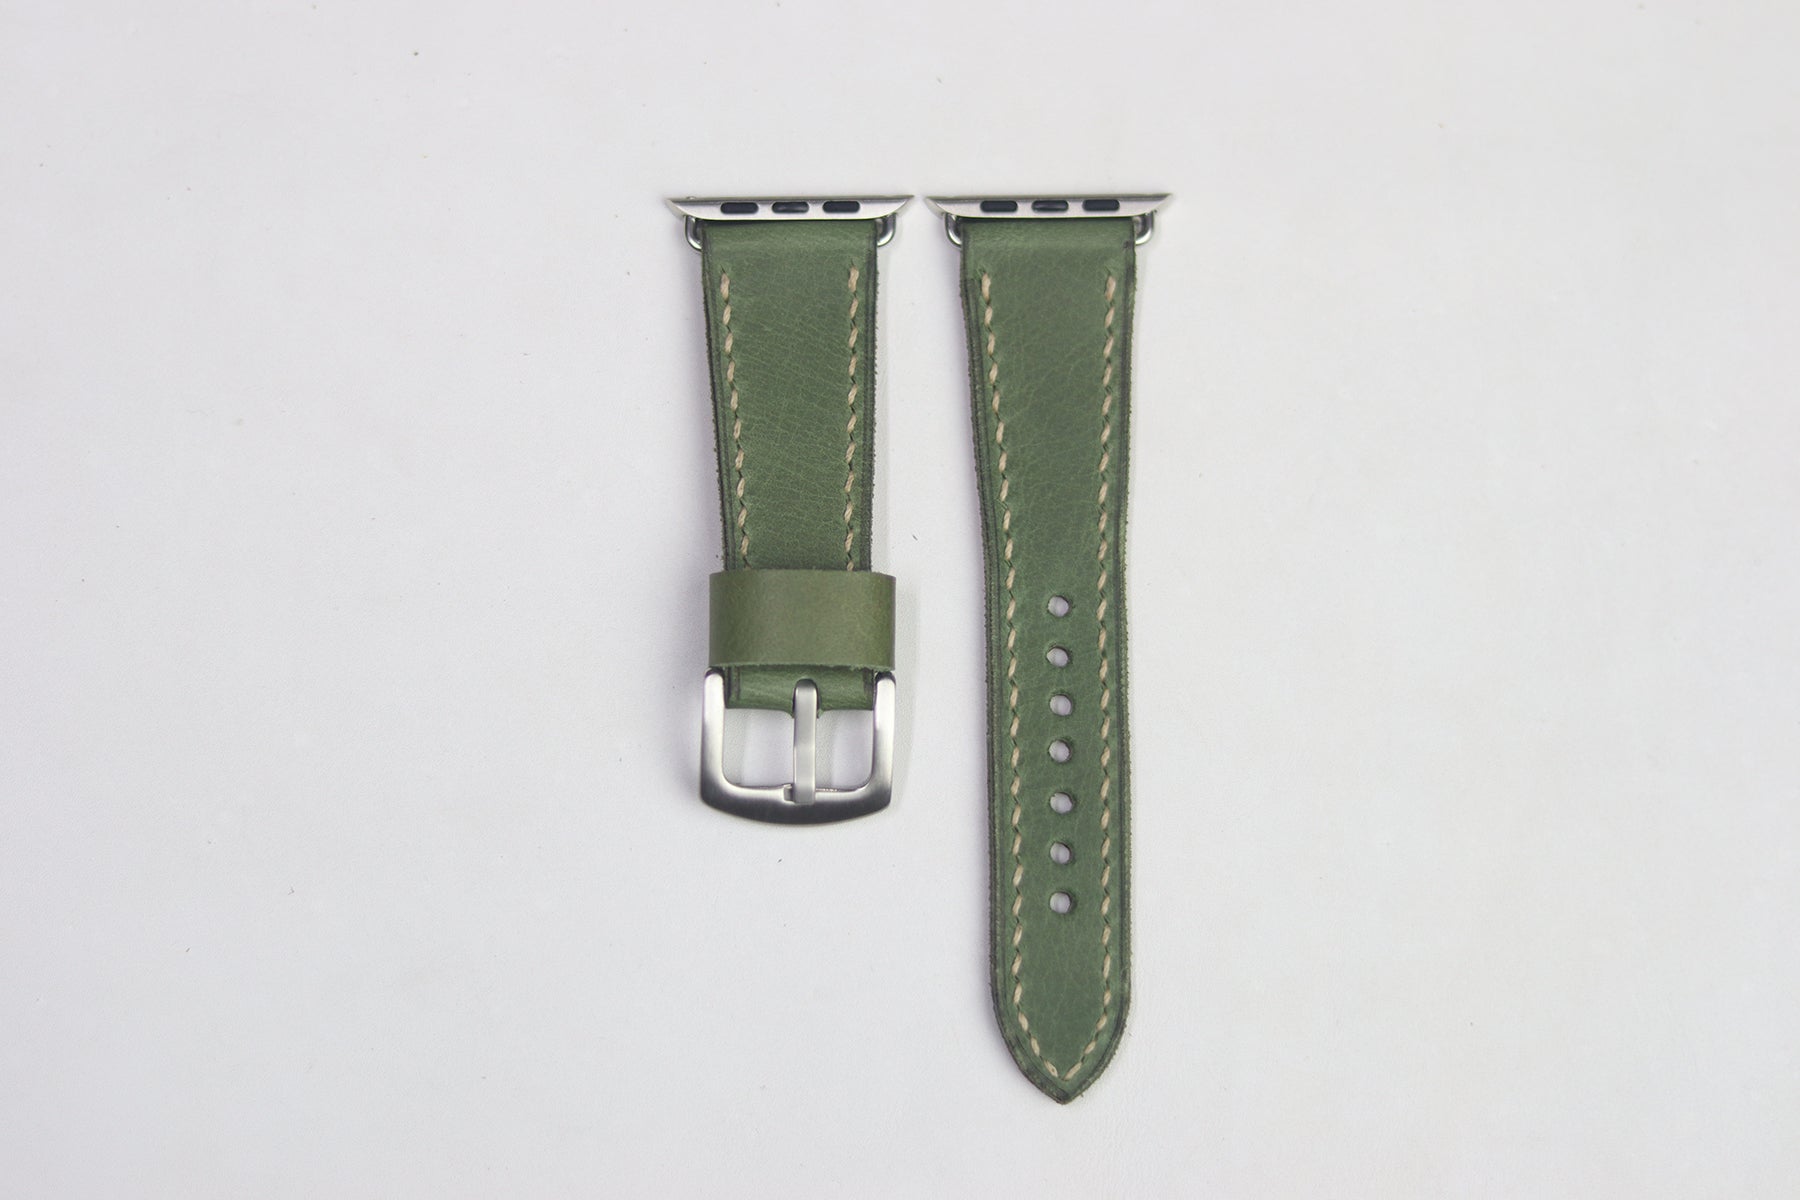 PARAKEET GREEN HAND-CRAFTED APPLE WATCH STRAPS